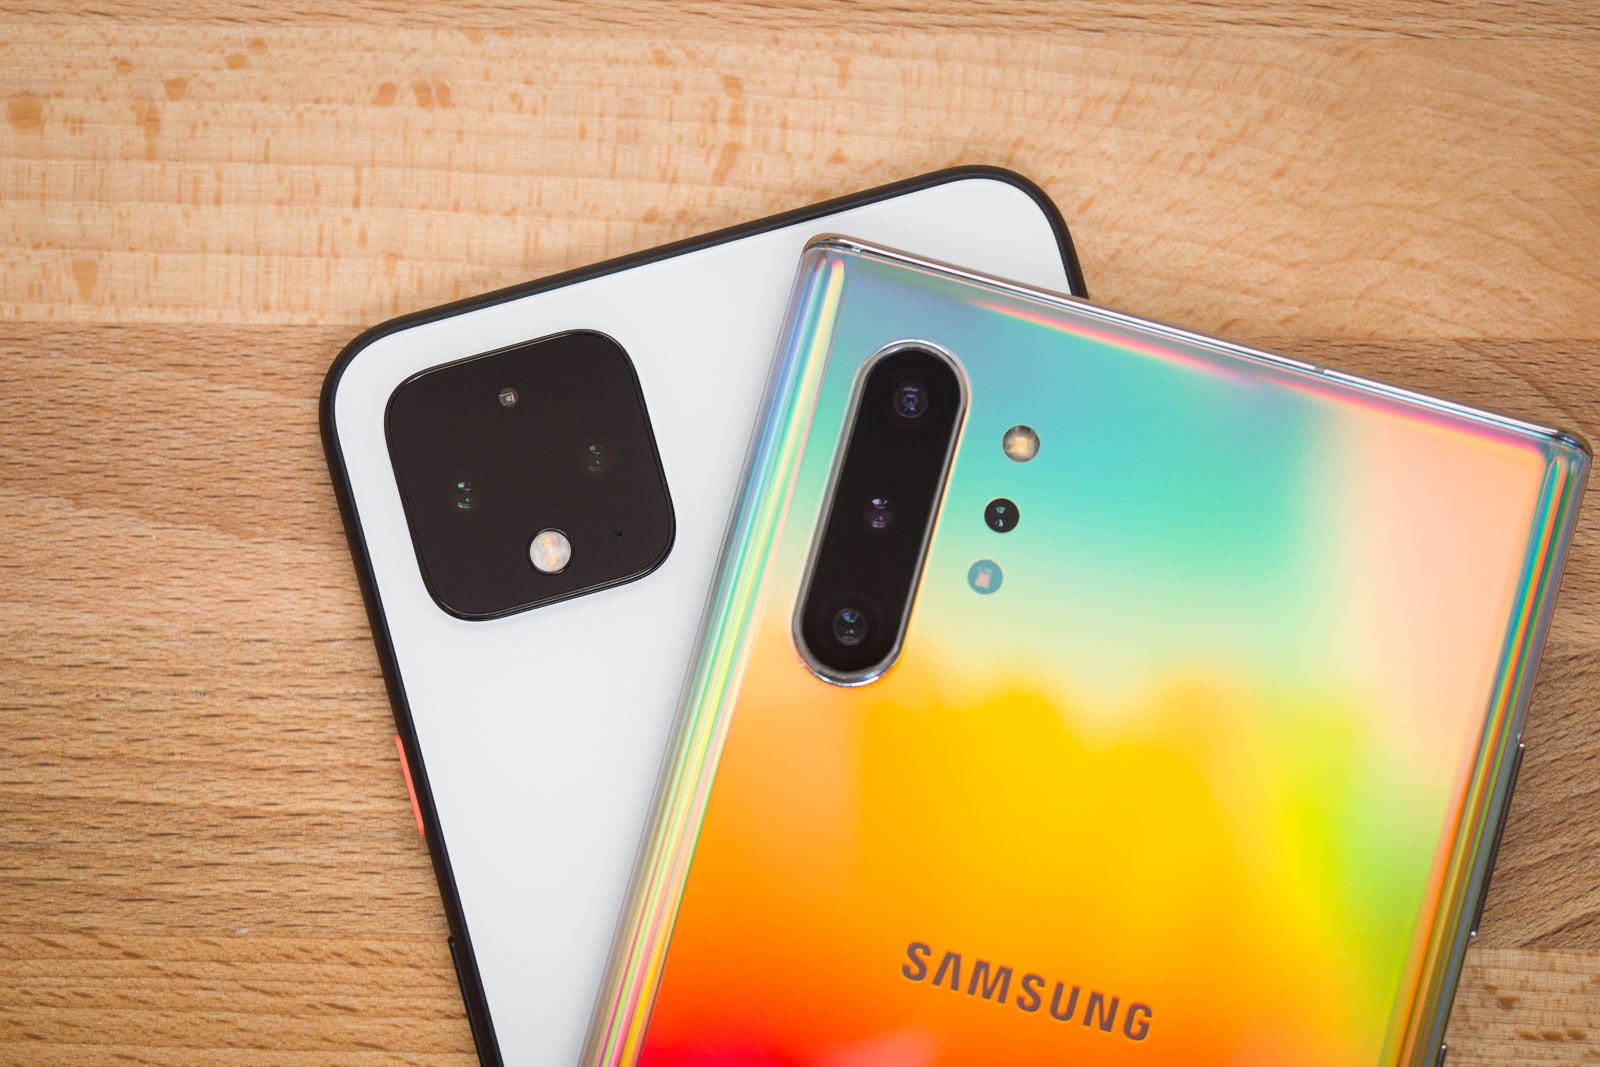 Google is working with Samsung - The 2021 Google Pixel 6 could ditch Qualcomm for custom chipsets